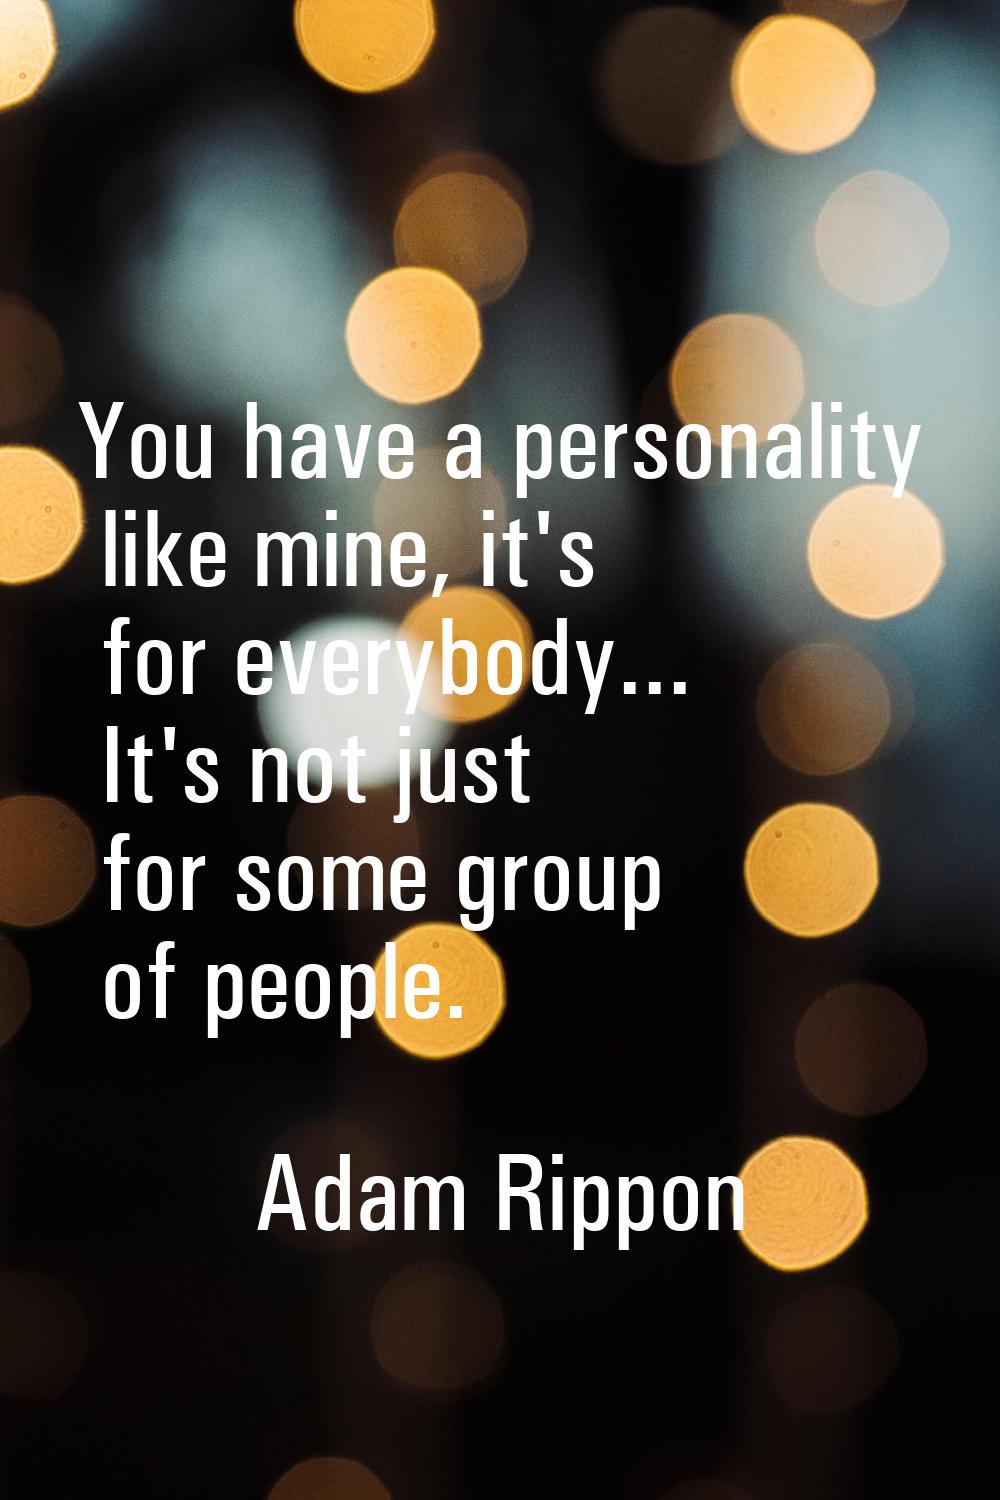 You have a personality like mine, it's for everybody... It's not just for some group of people.